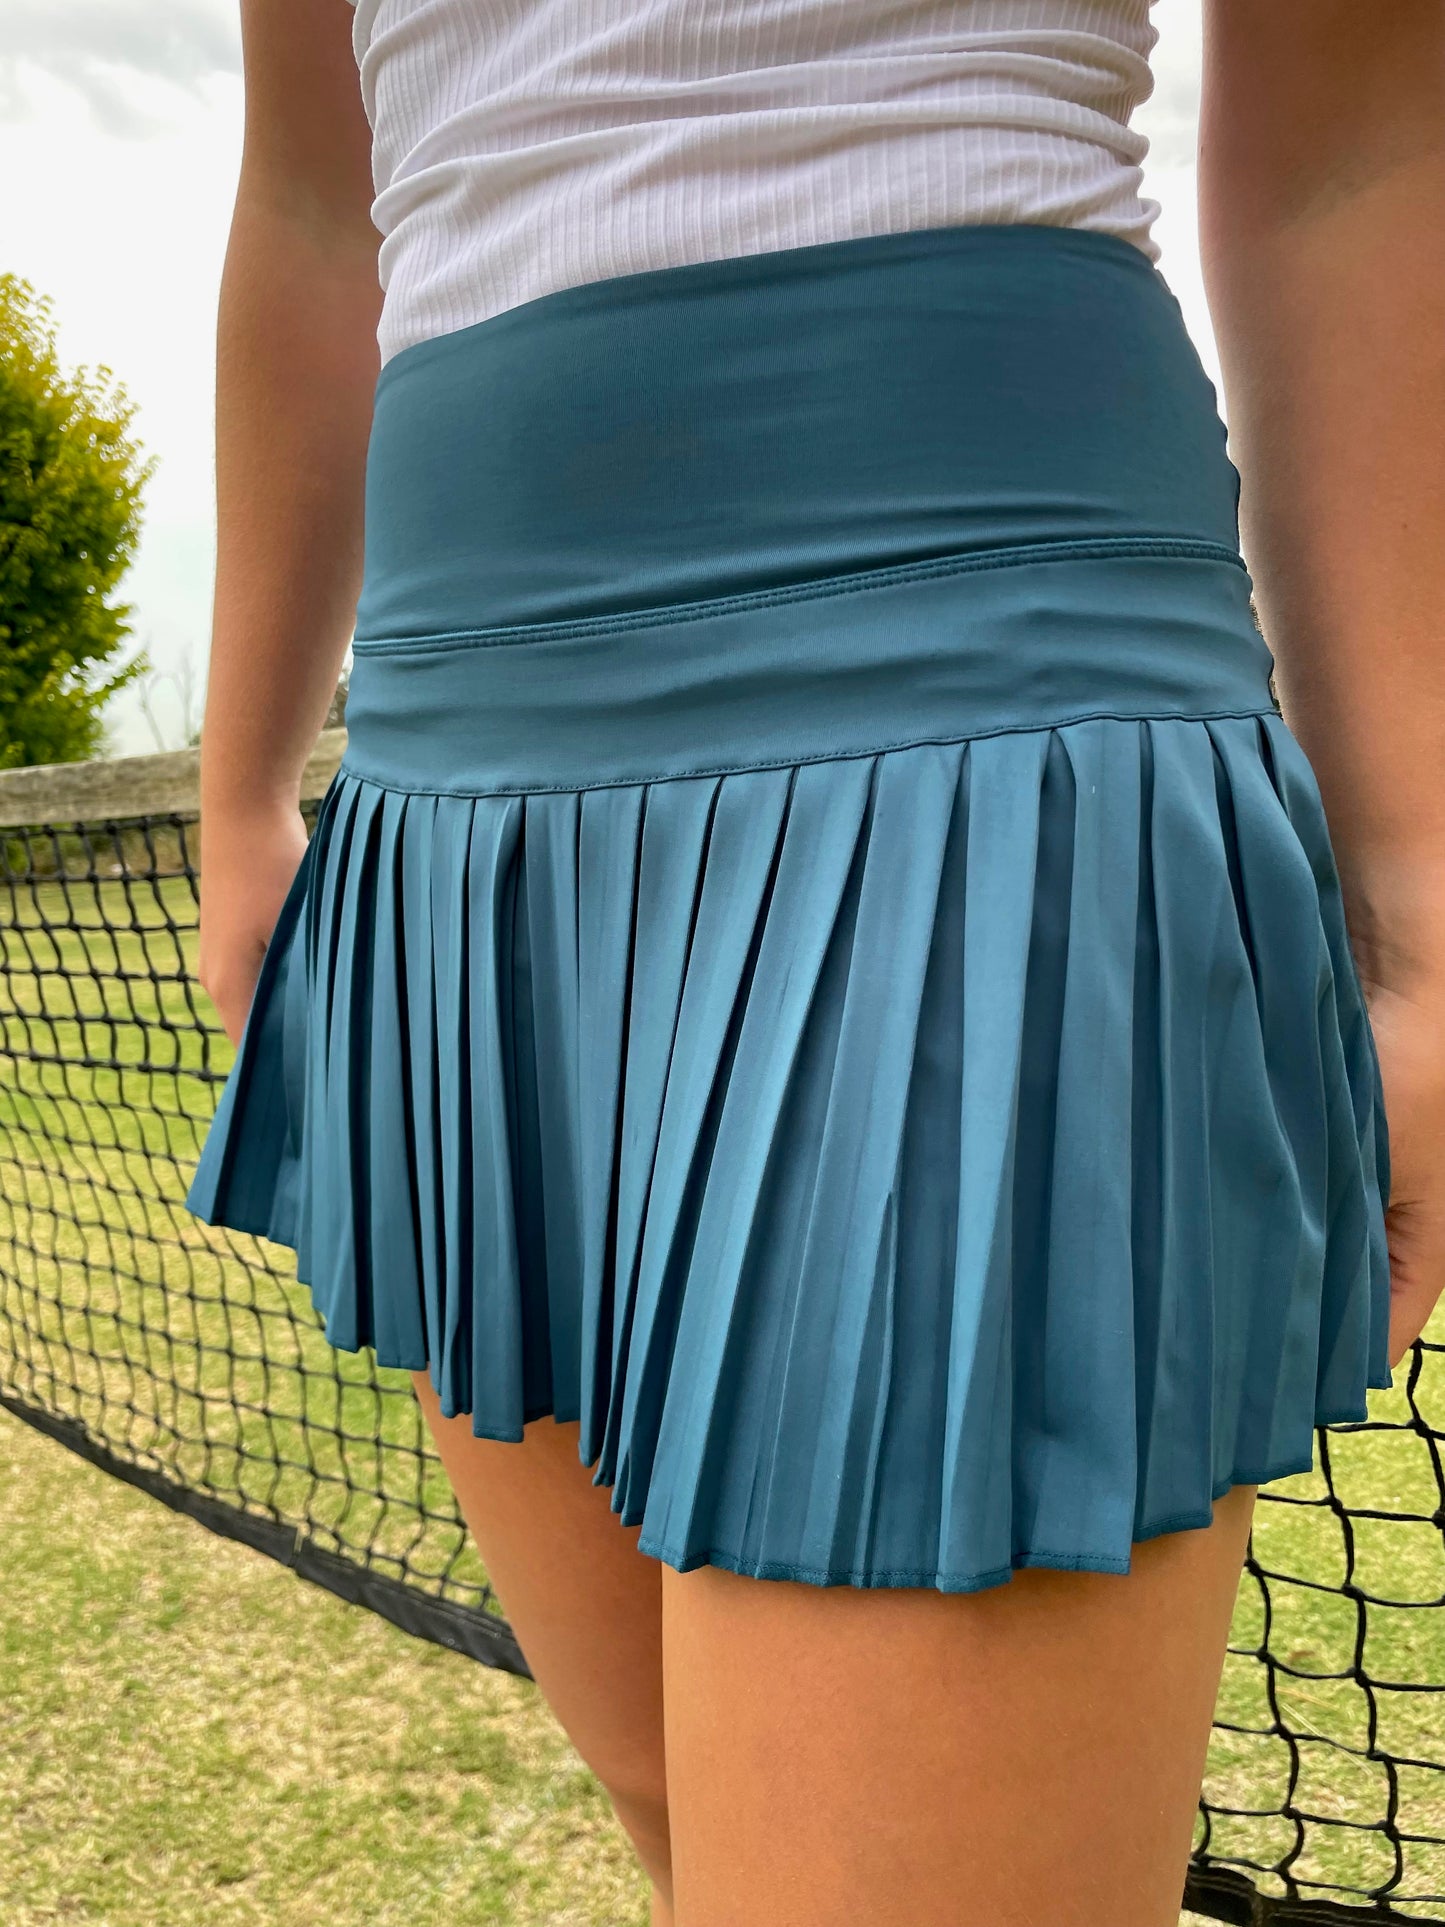 GAME DAY skirt in teal